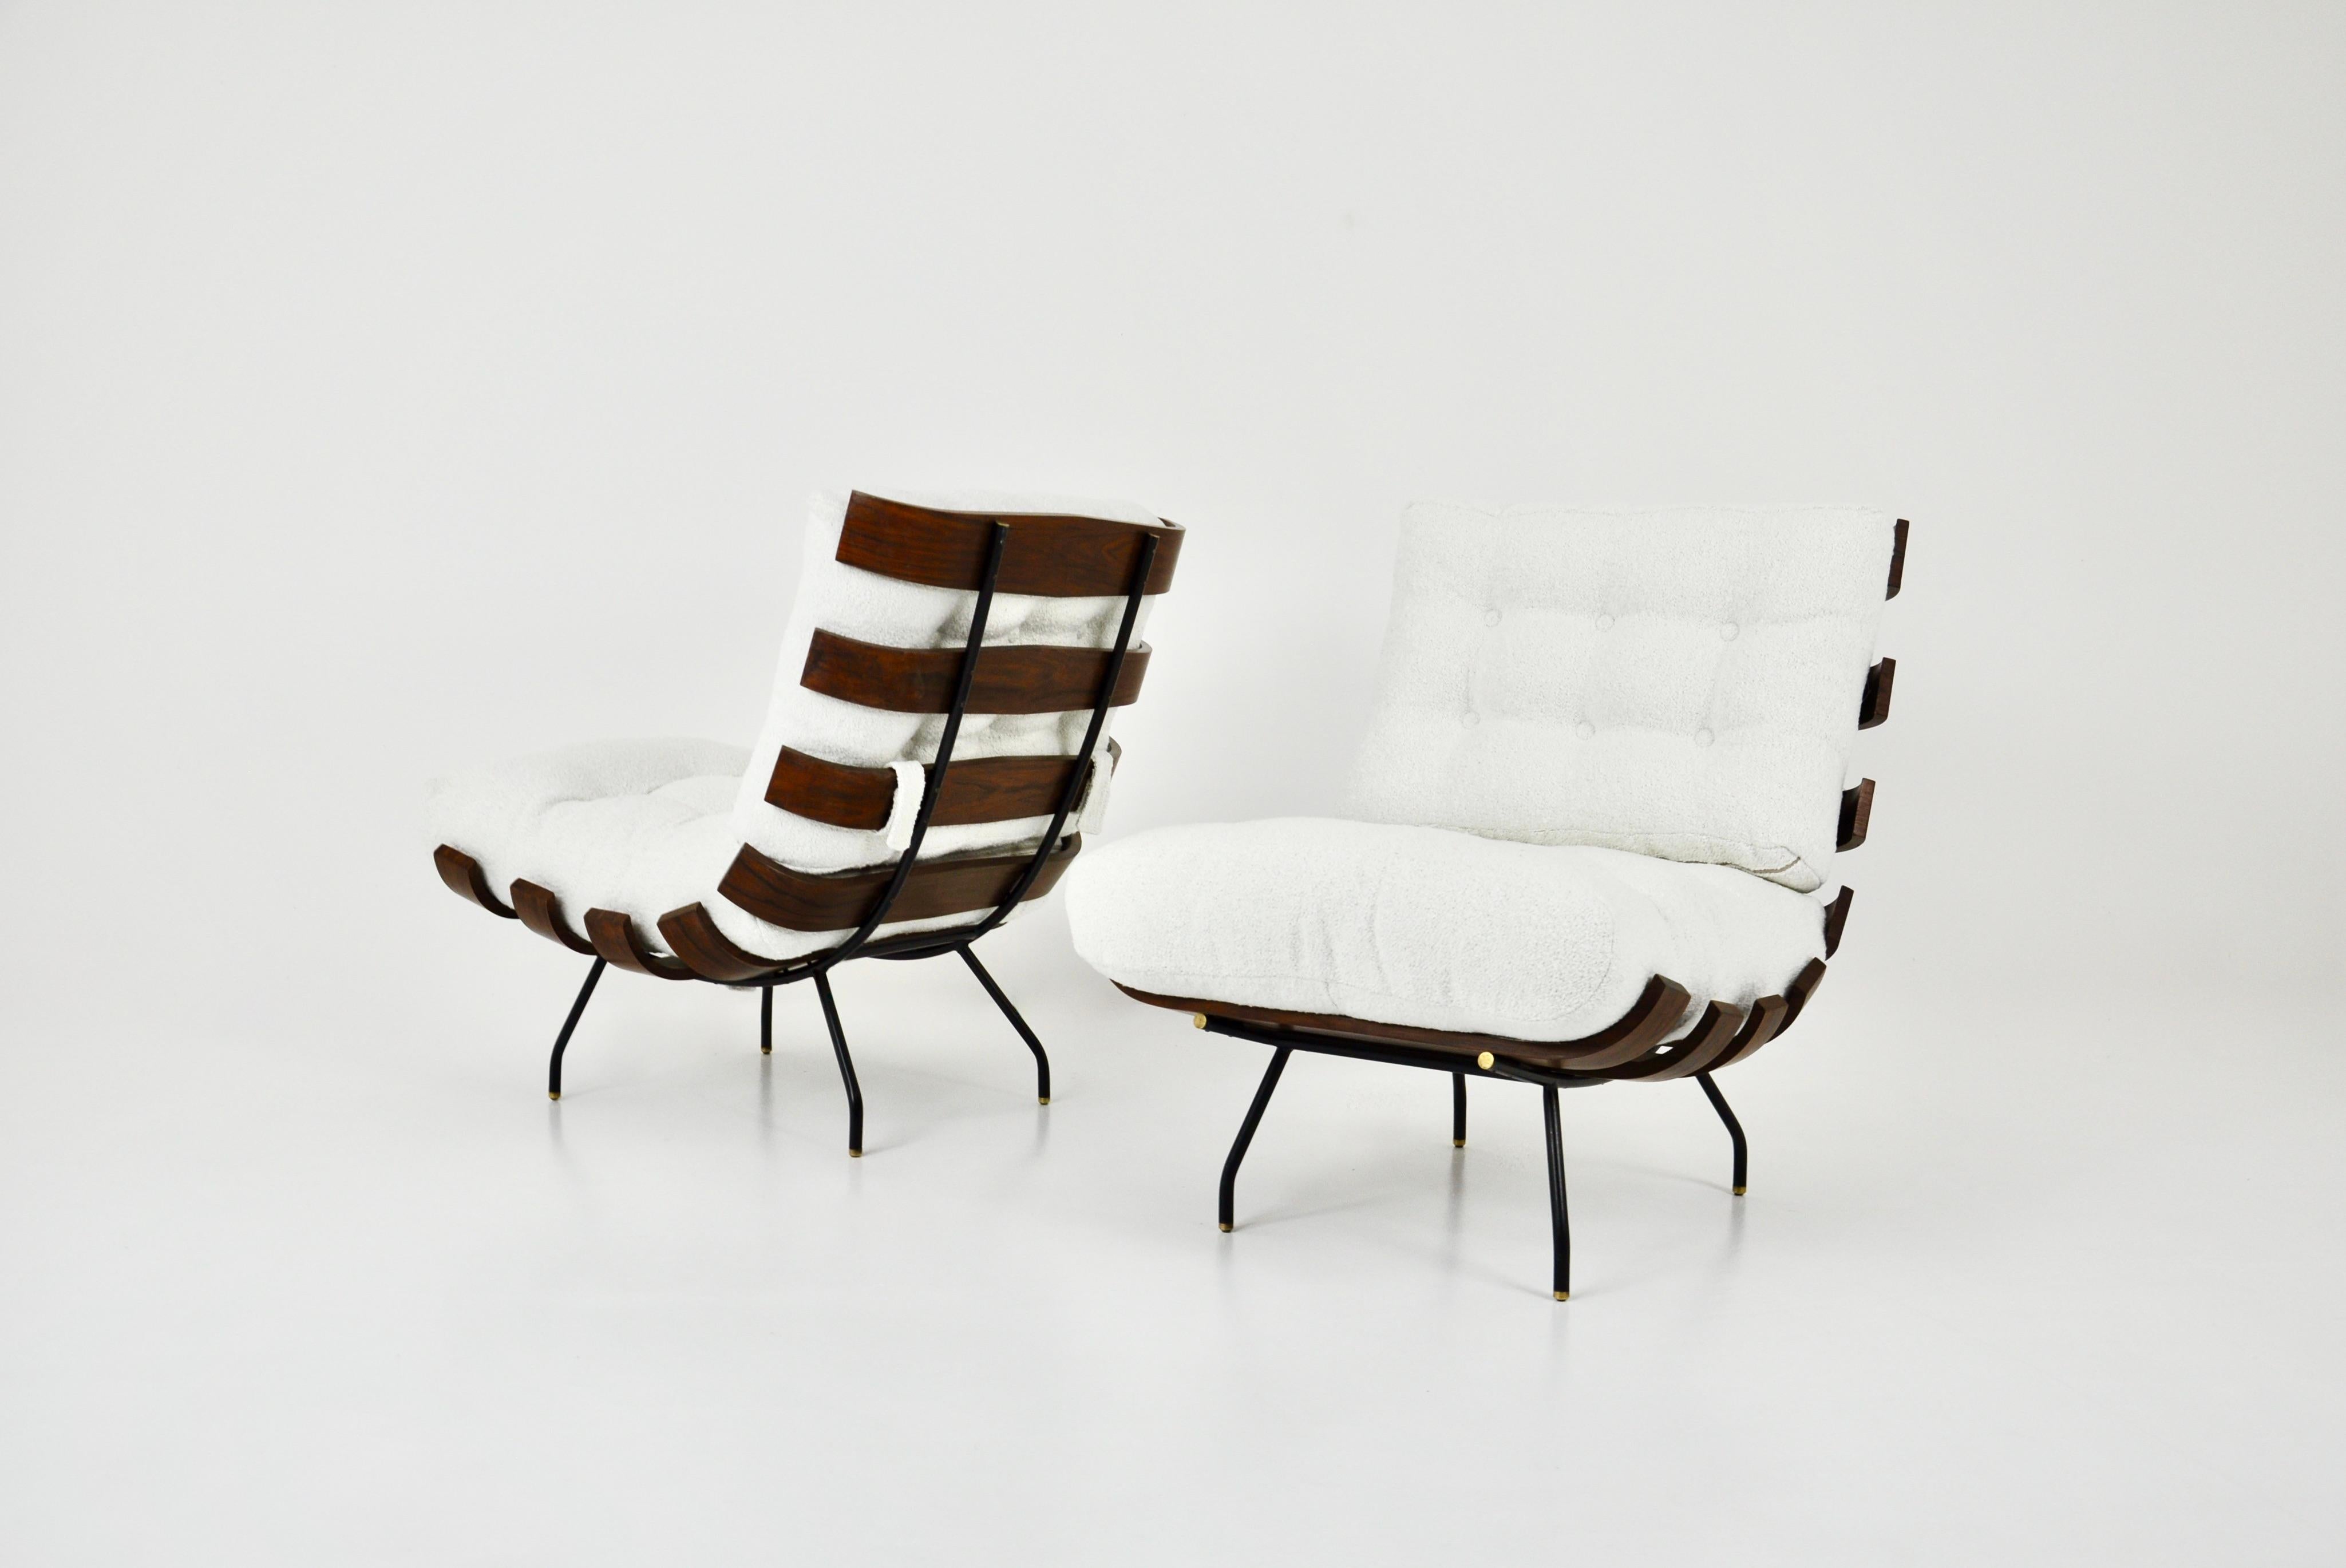 2 Costela lounge chairs in wood, metal legs and curly fabric cushions by Martin Eisler and Carlo Hauner. Seat height: 48 cm. Wear due to time and age of the lounge chairs. 